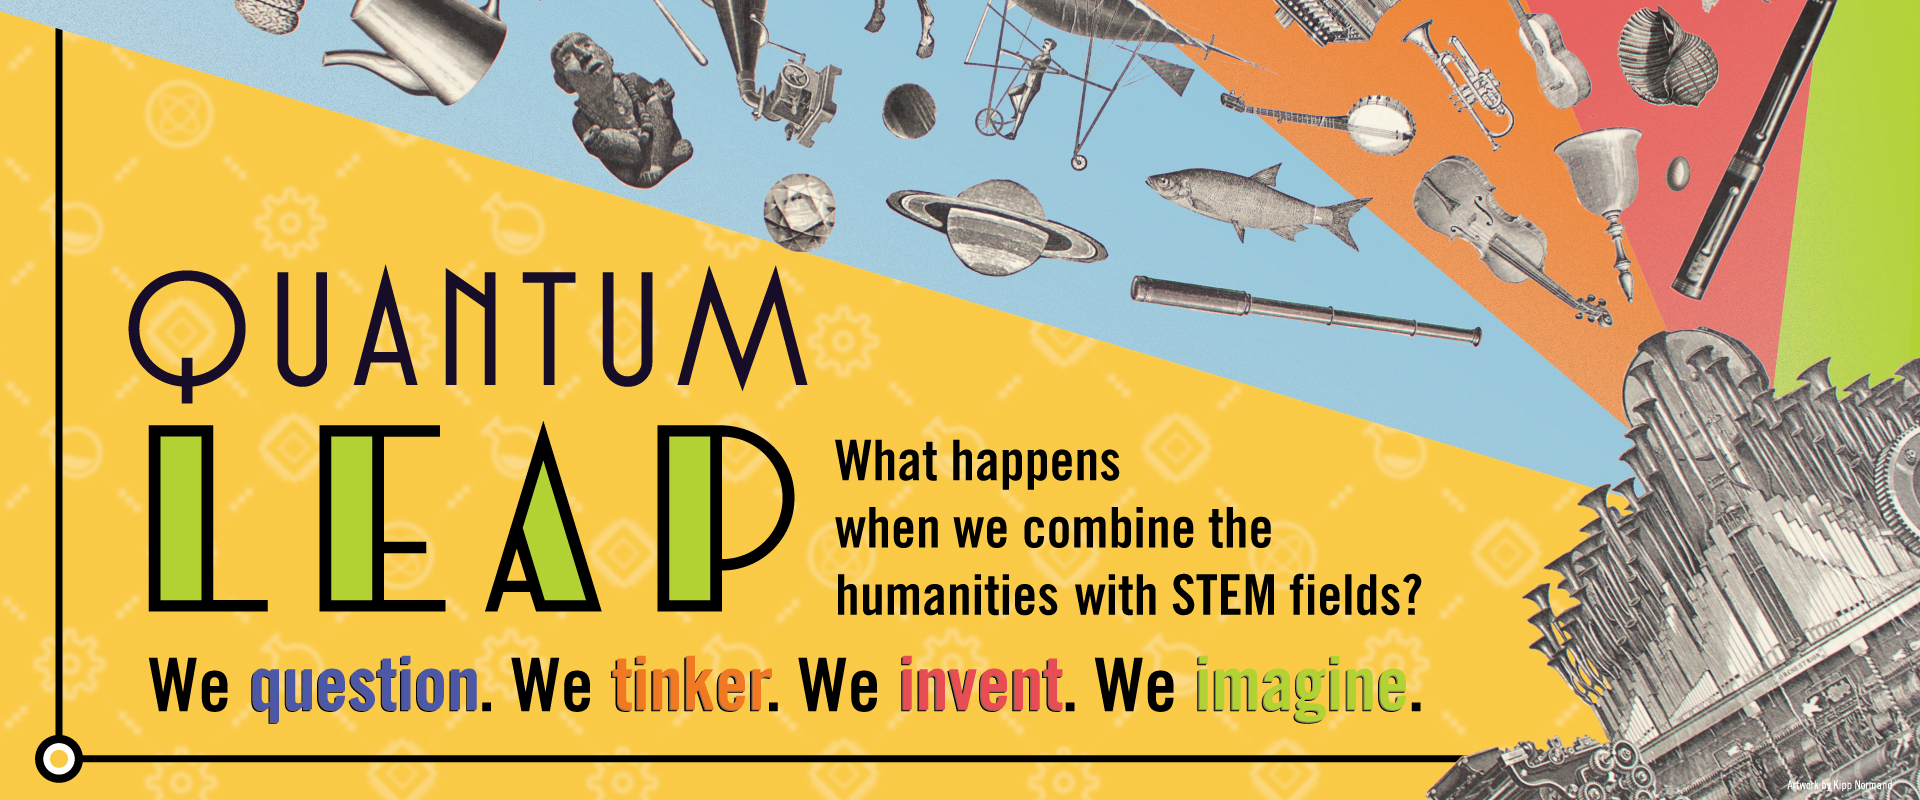 Quantum Leap: What happens when we combine the humanities with STEM fields? 